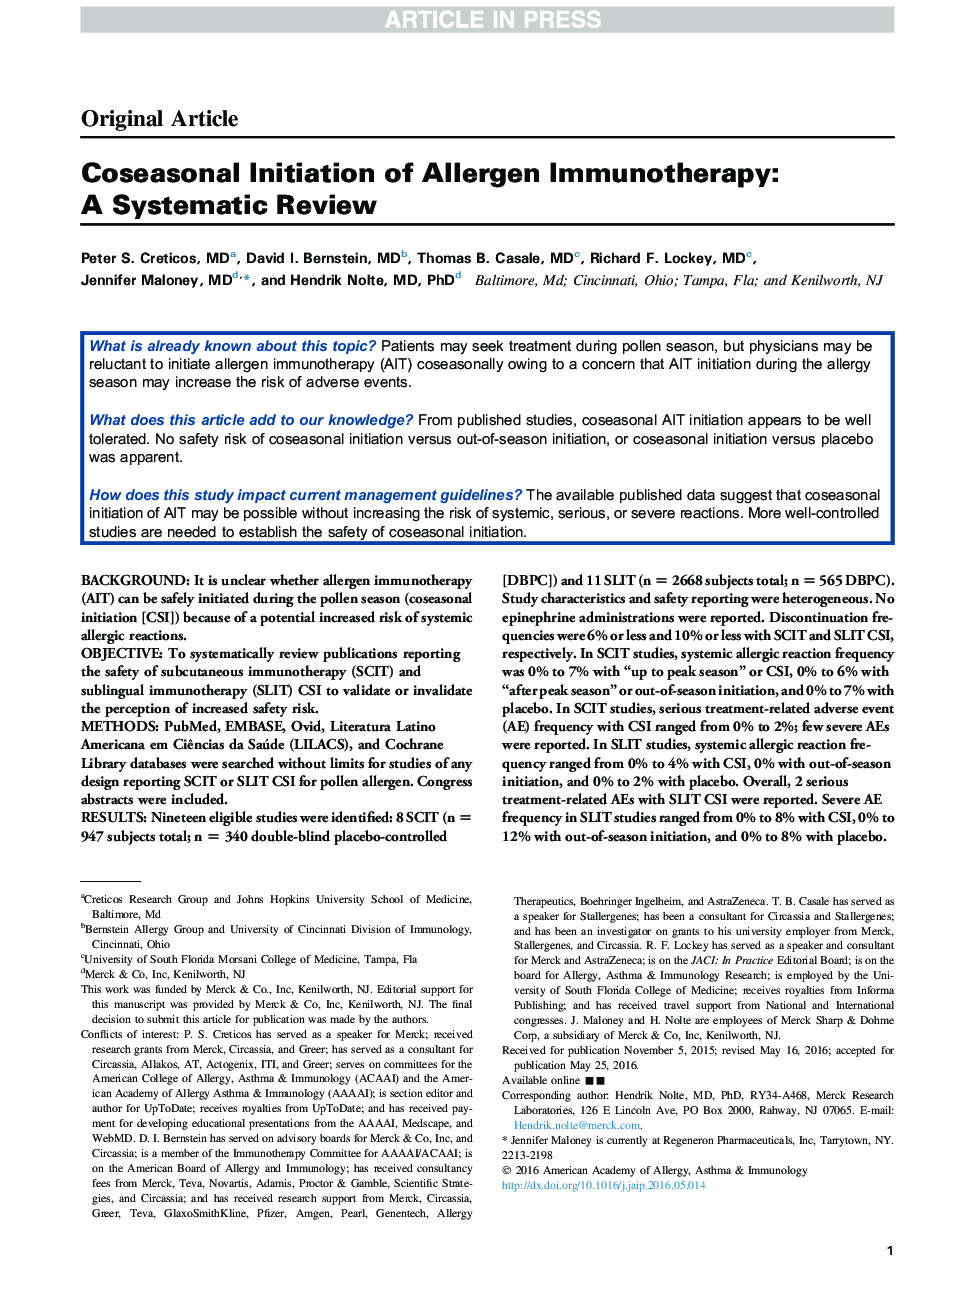 Coseasonal Initiation of Allergen Immunotherapy: A Systematic Review